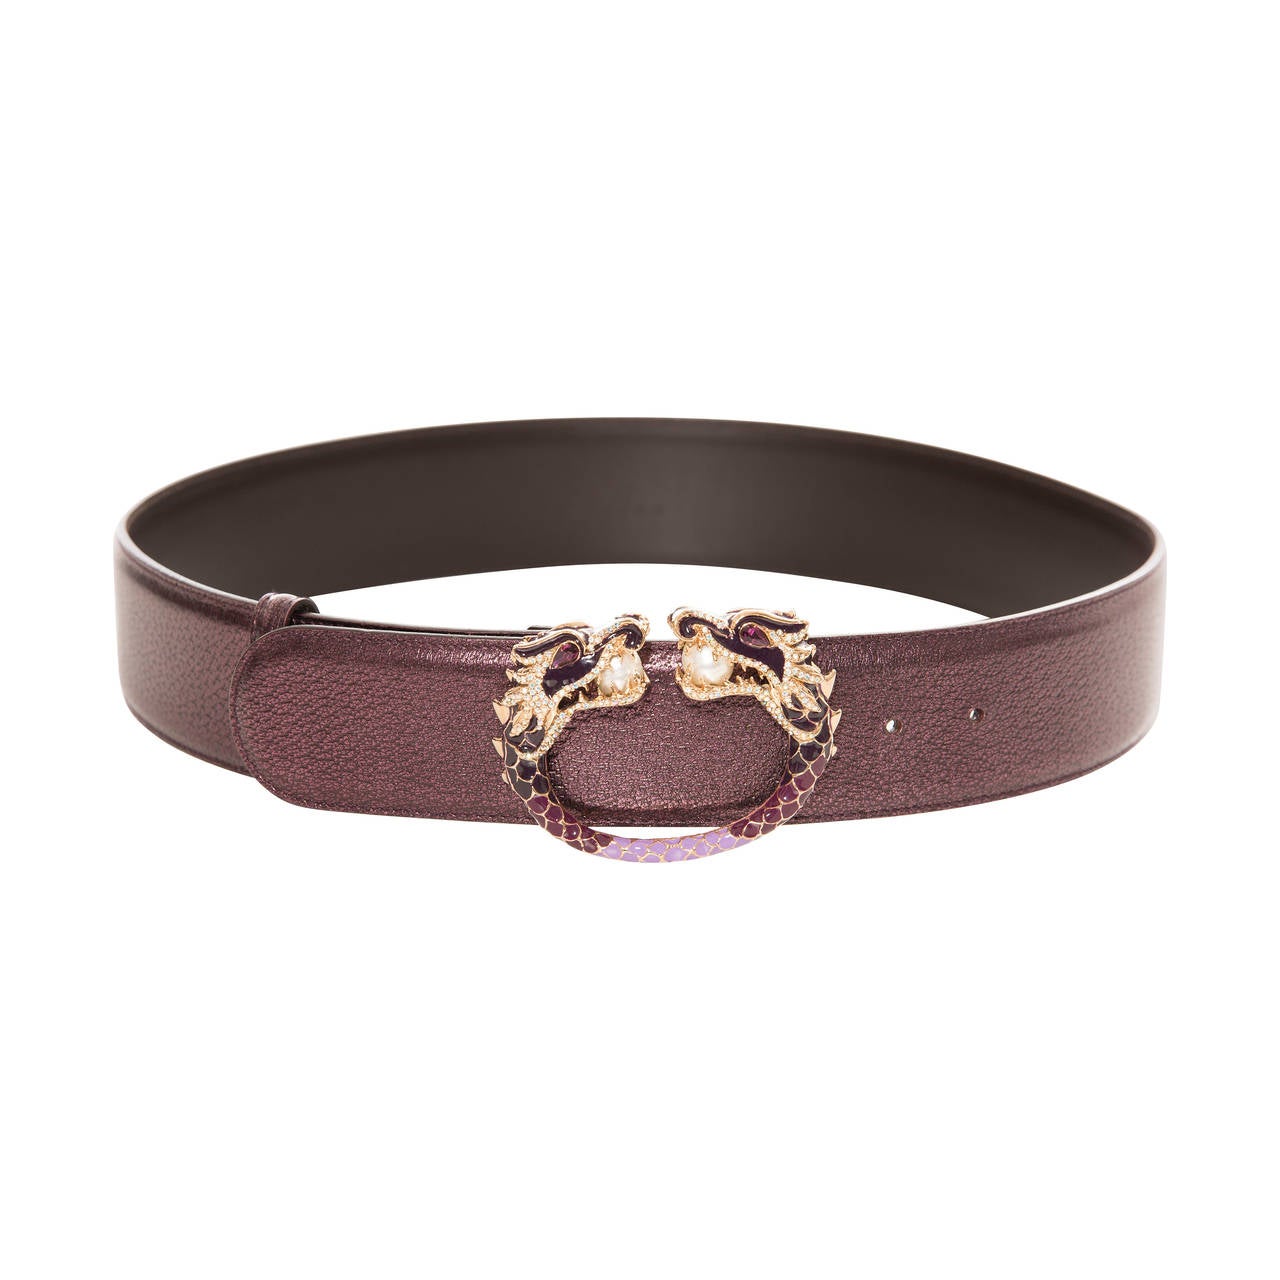 Tom Ford for Gucci Metallic Leather Belt With Dragon Buckle, Circa 1990 ...